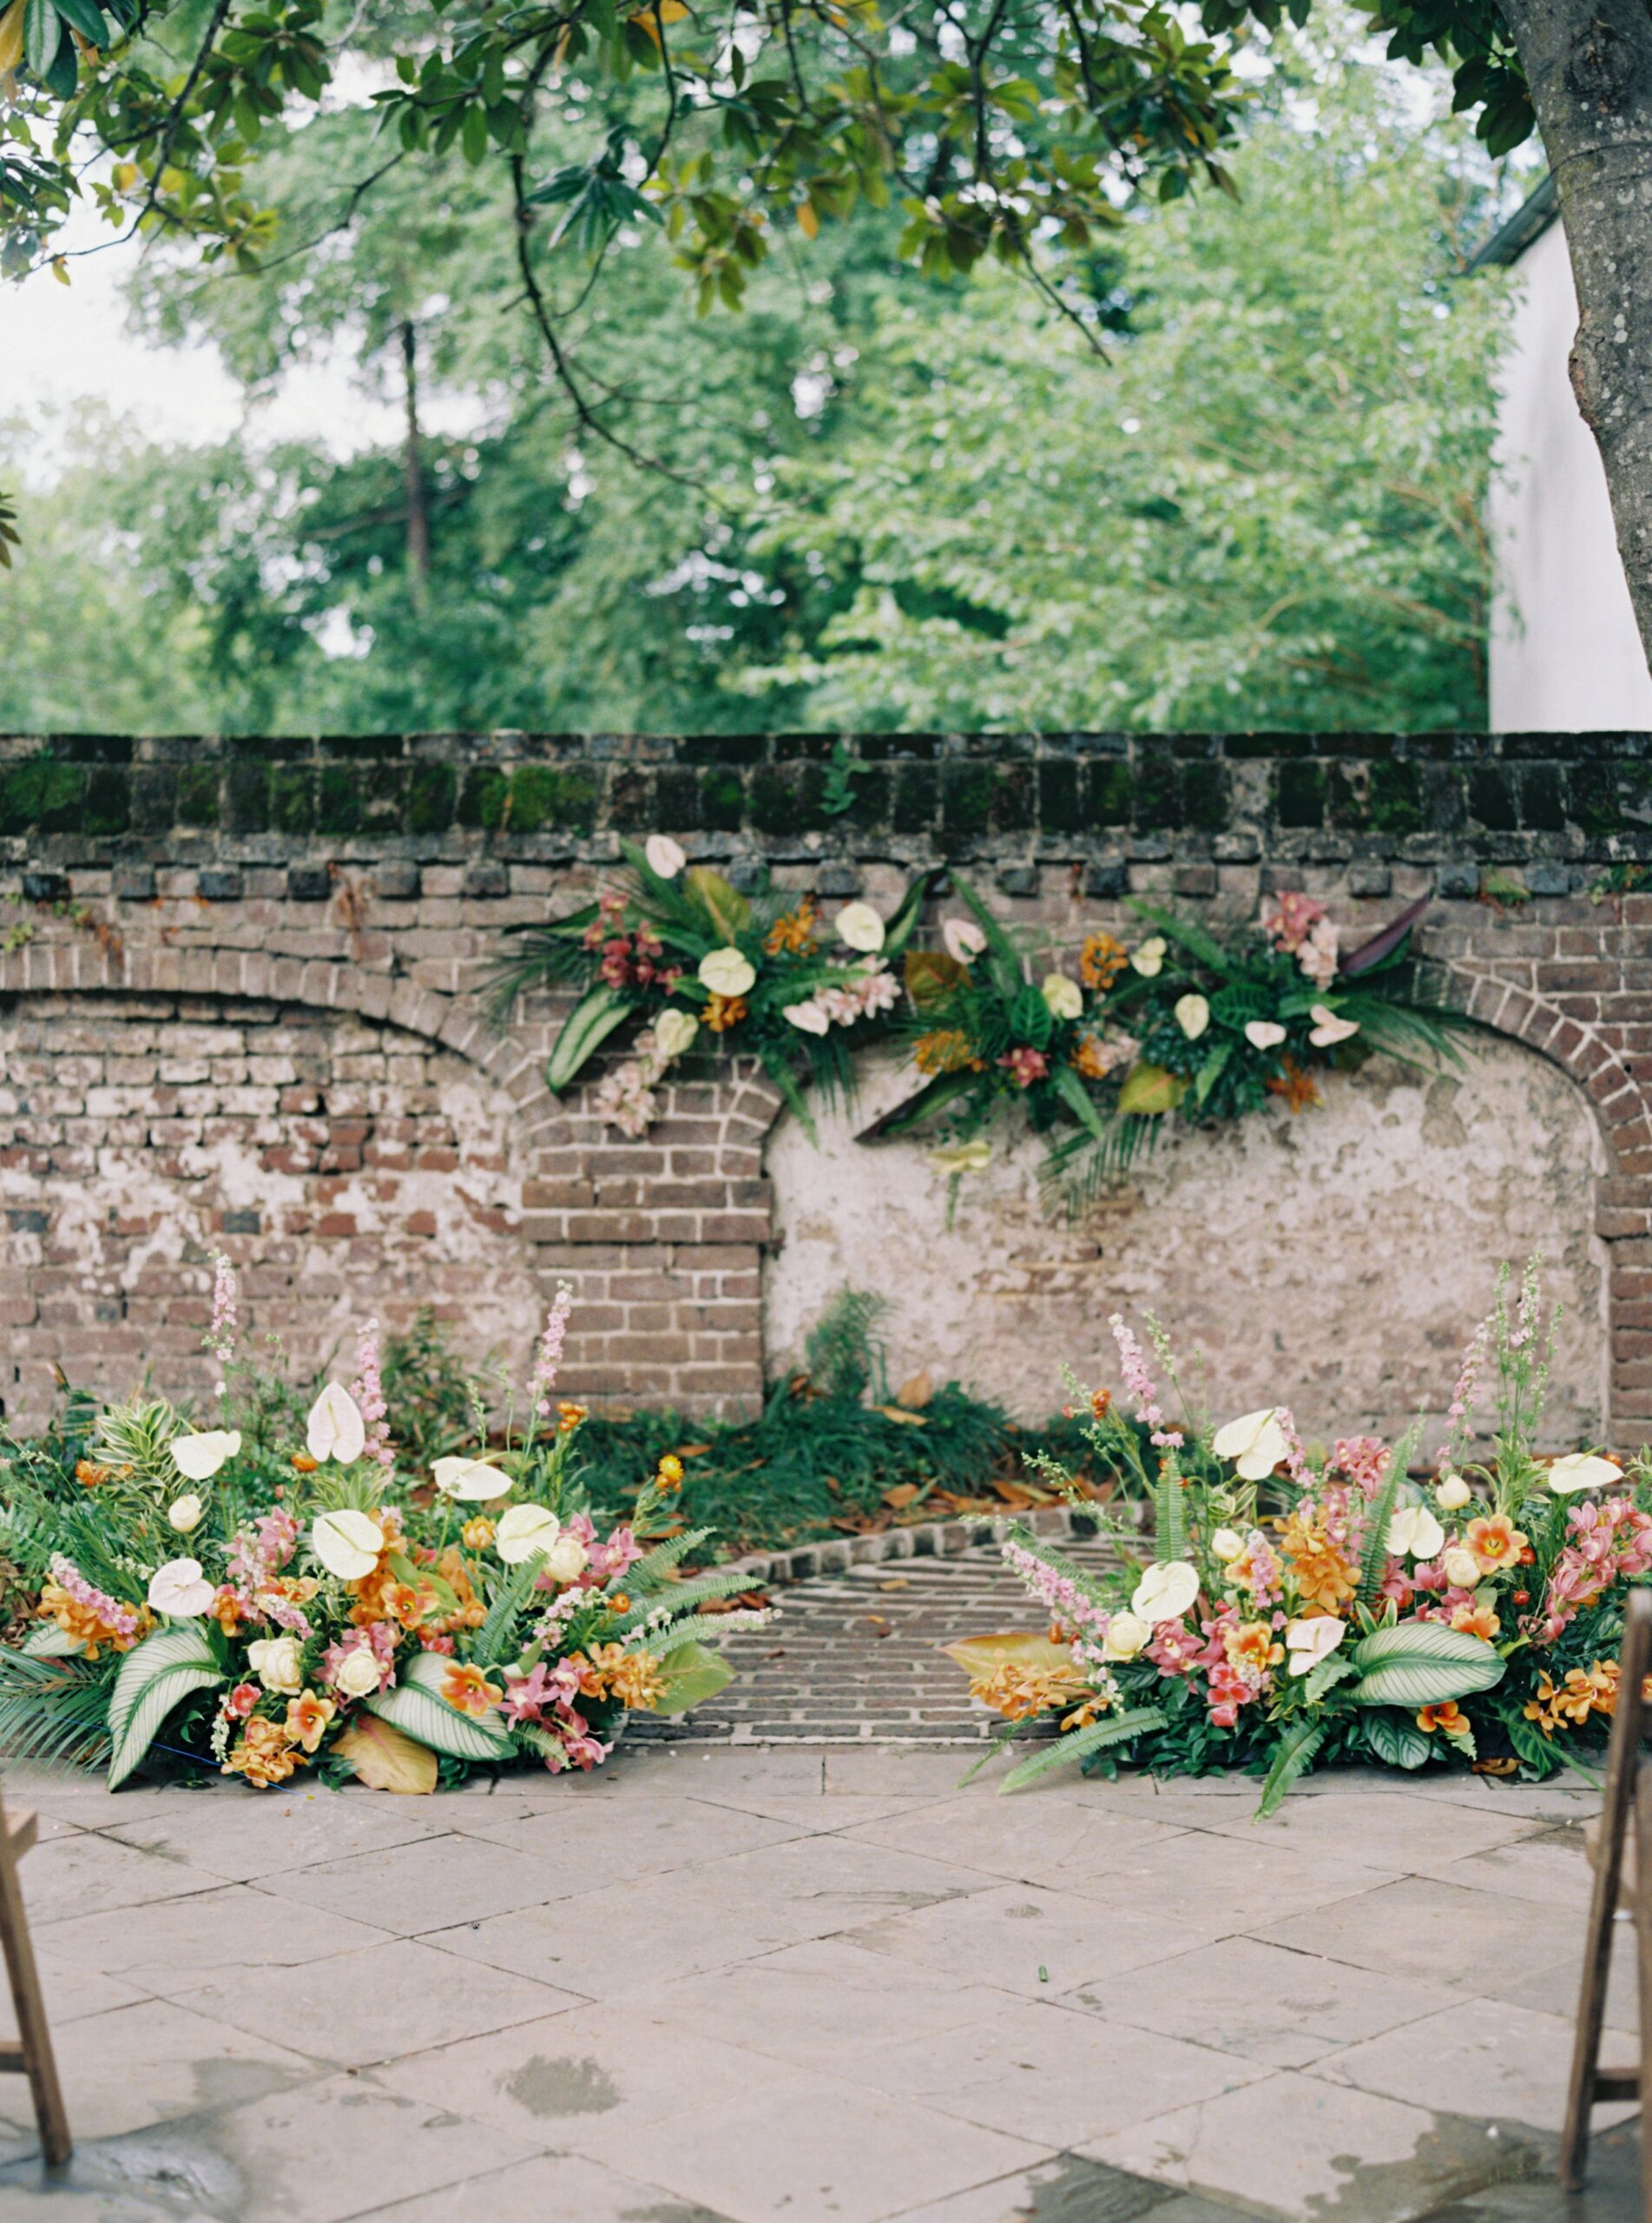 Tropical flowers ceremony set up with lush greenery at Gadsden House wedding venue in Charleston SC.